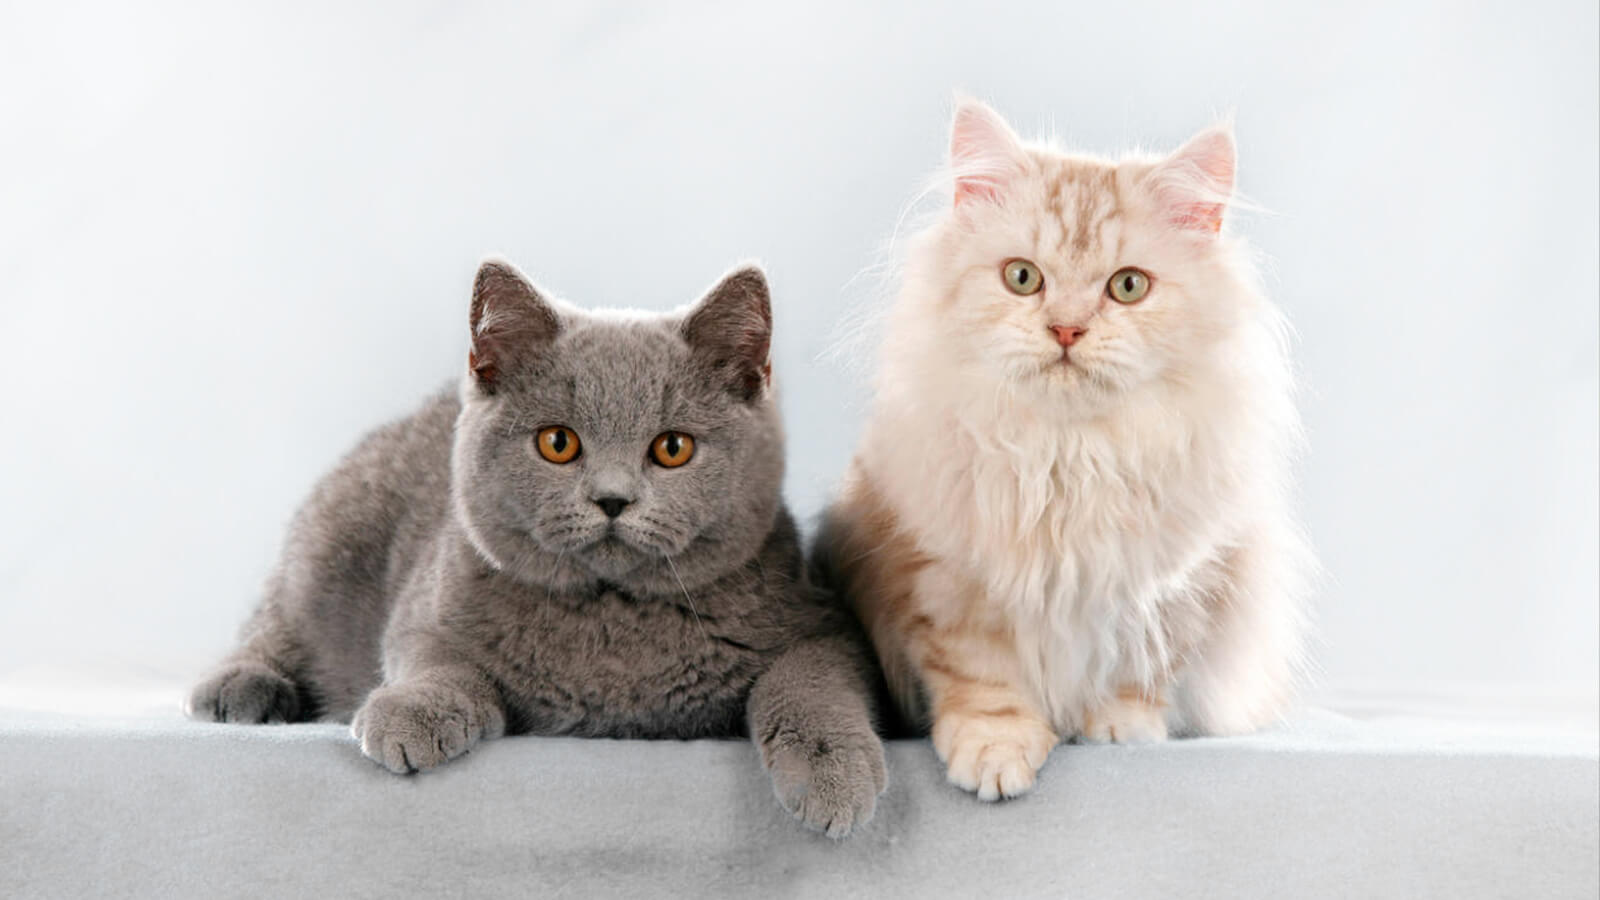 Differences in Fur Between Short-Haired and Long-Haired Cats